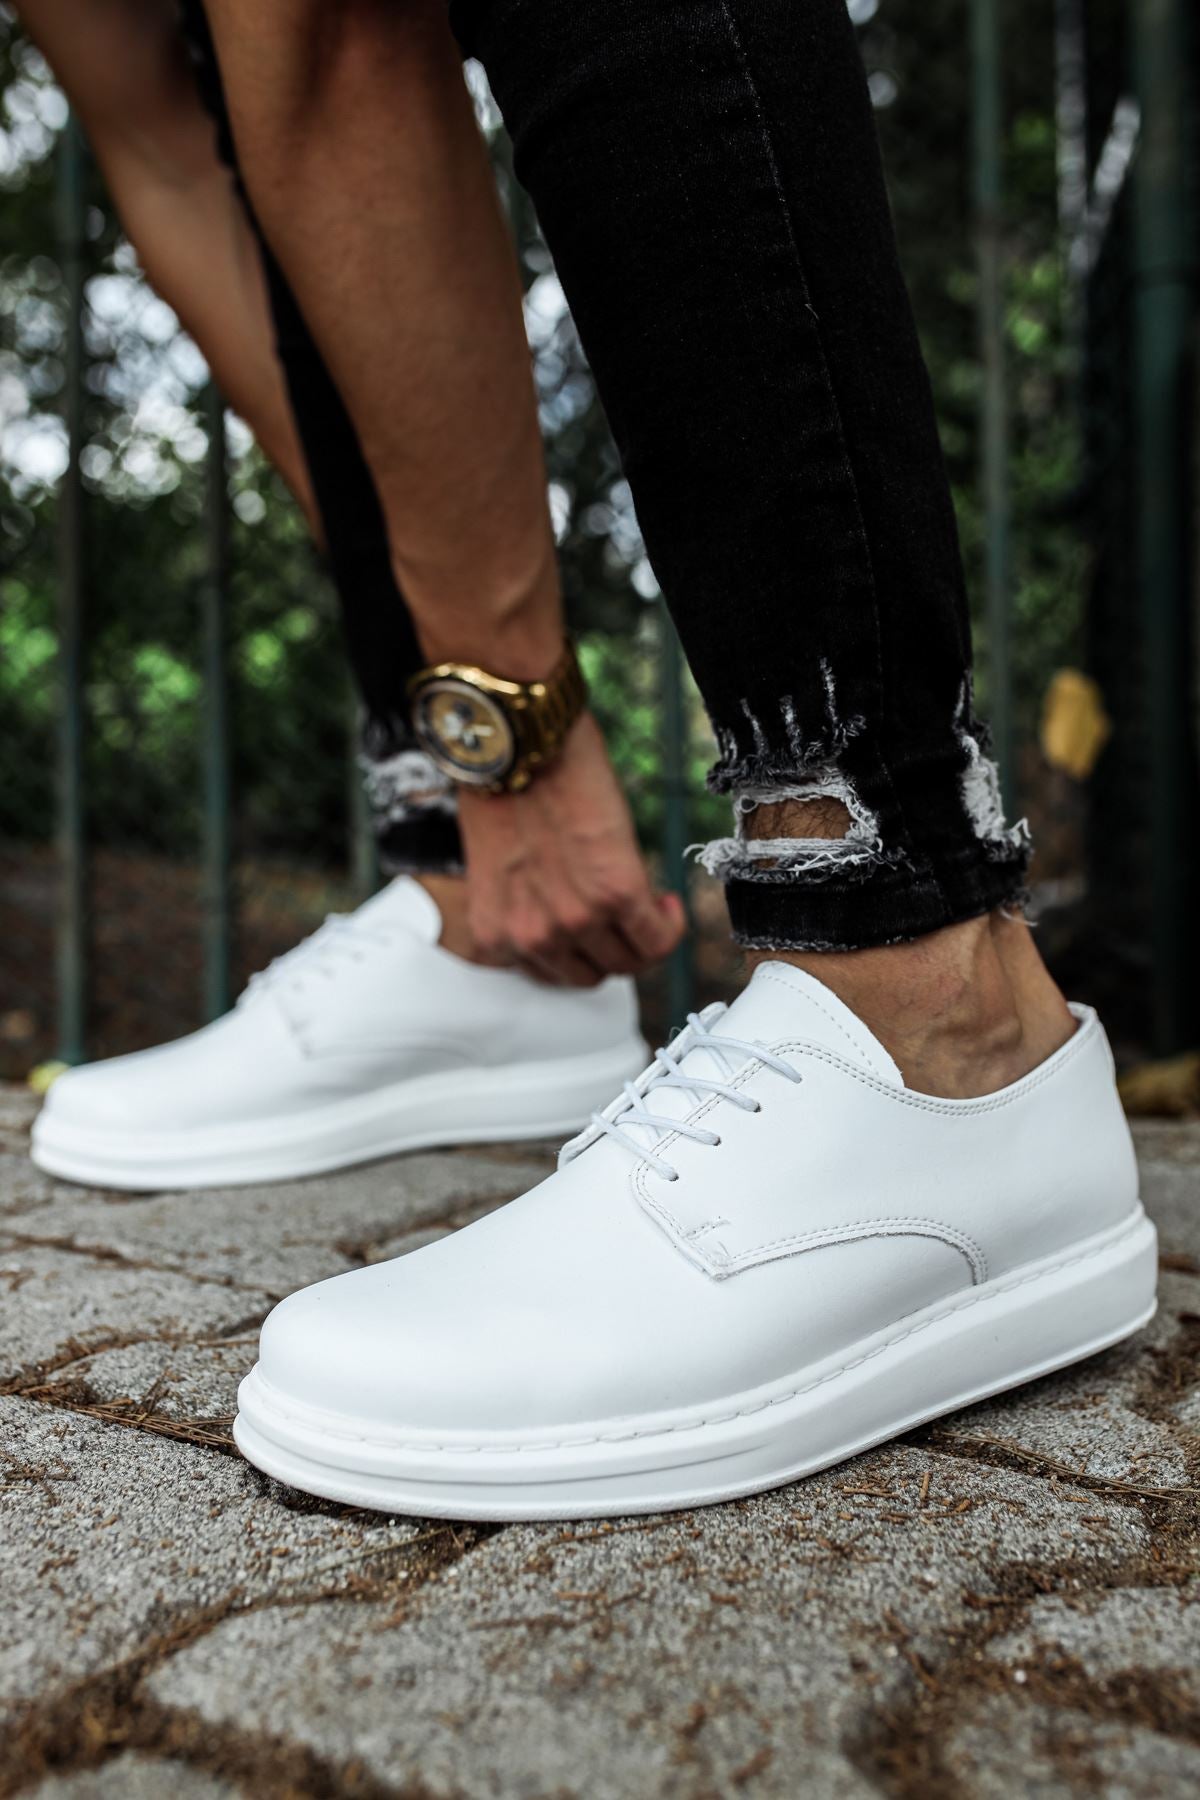 CH003 Men's Full White Matte Leather Casual Classic Sneaker Shoes - STREETMODE ™